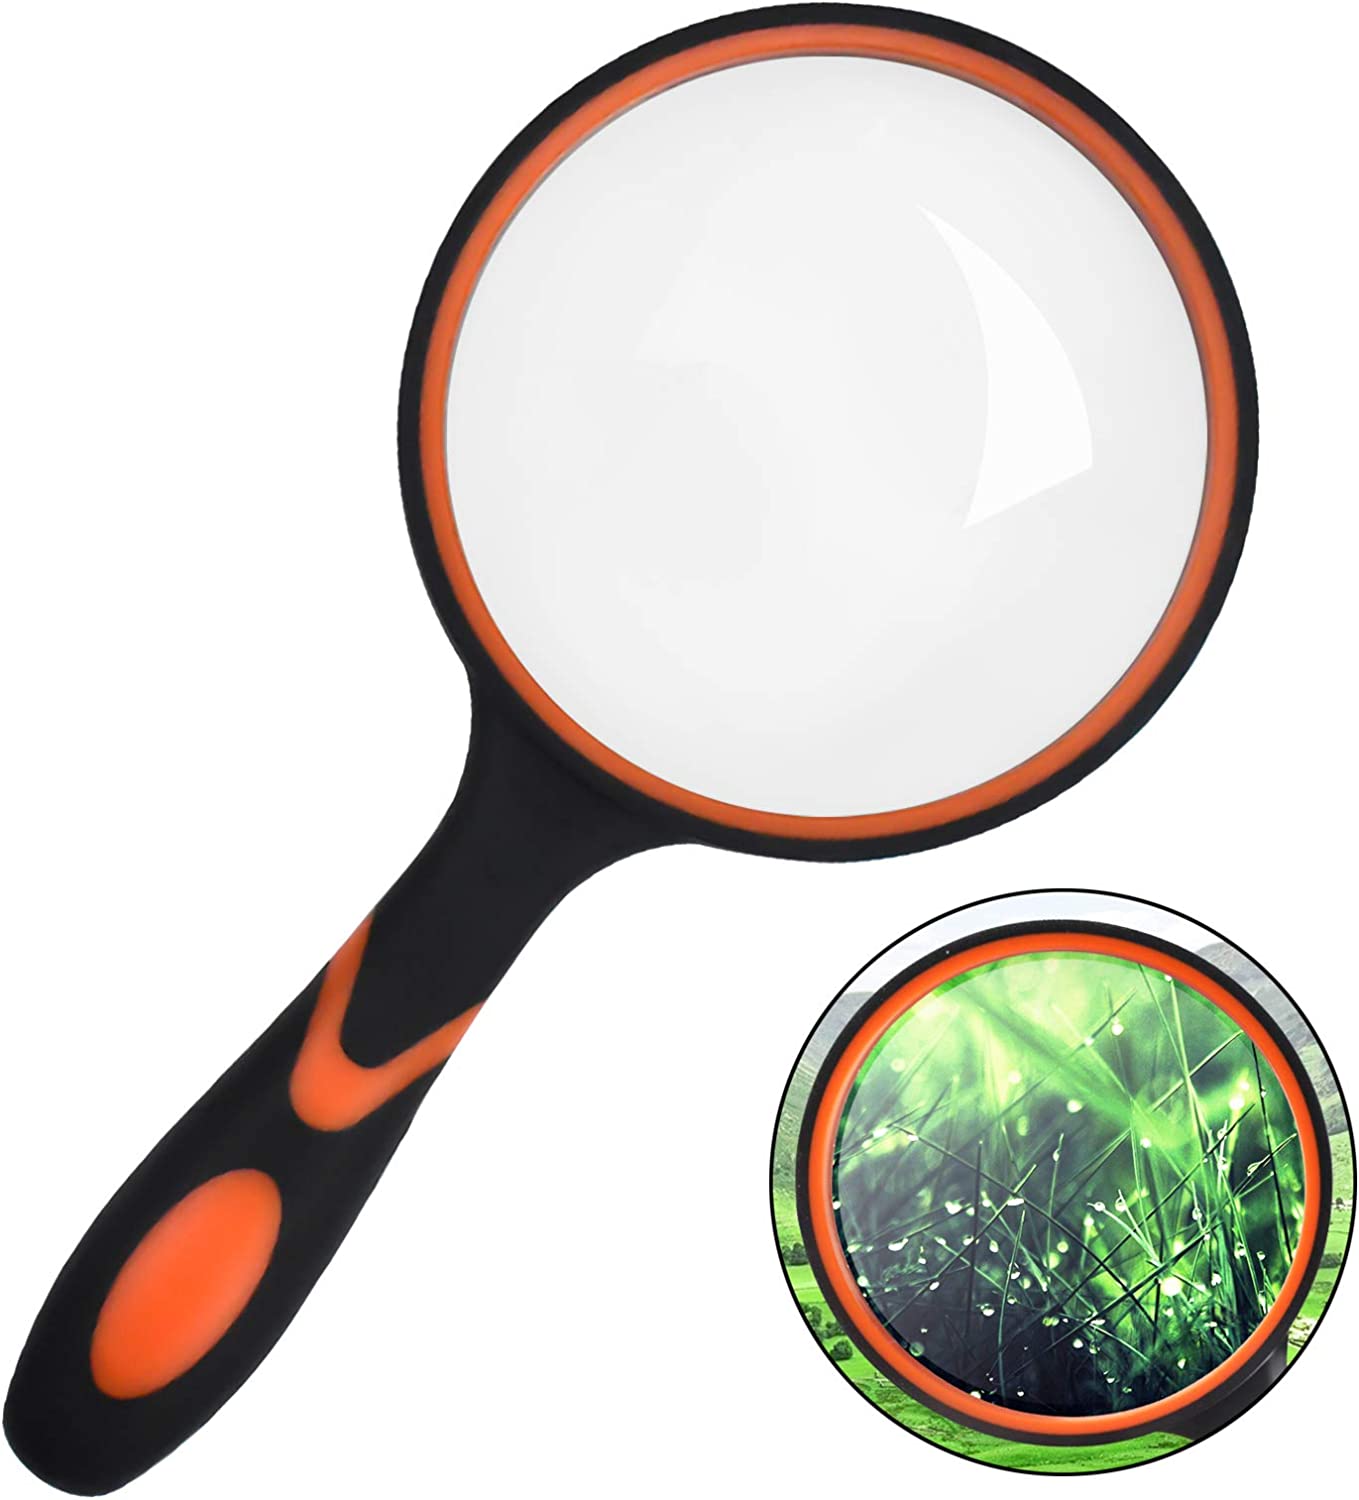 Magnifying Glass 10X,100mm/4inch Magnifying Lens Handheld Reading Magnifier with Non-Slip Soft Rubber Handle for Reading Books, Inspection,Insect and